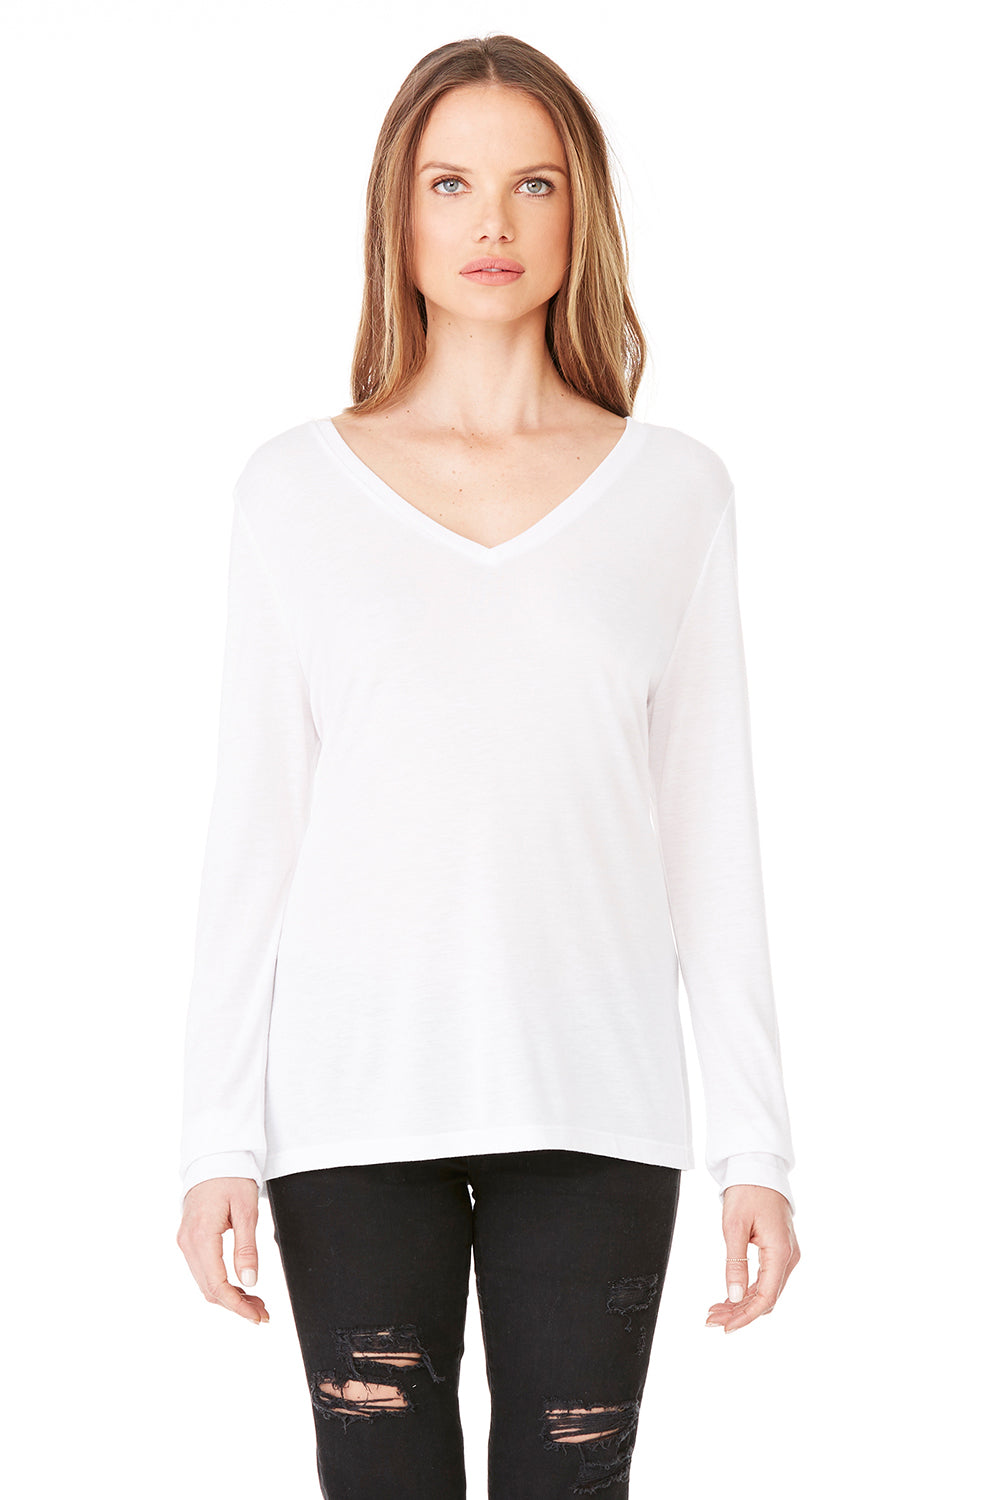 Bella + Canvas 8855 Womens Flowy Long Sleeve V-Neck T-Shirt White Front